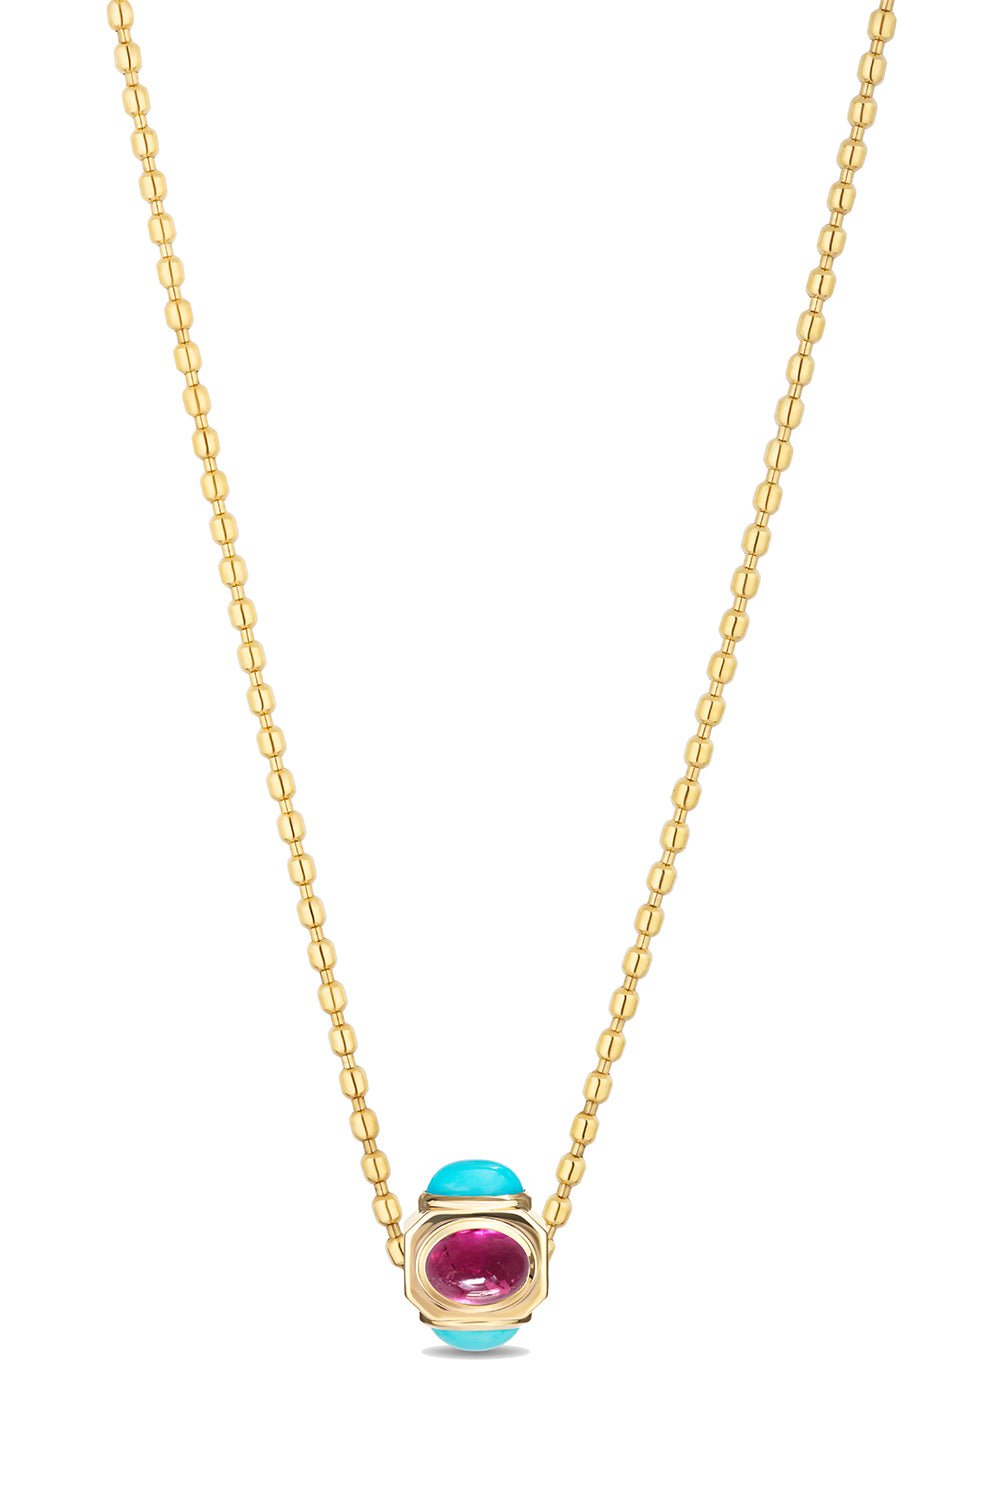 MASON & BOOKS-Turquoise Golden Nugget Necklace-YELLOW GOLD